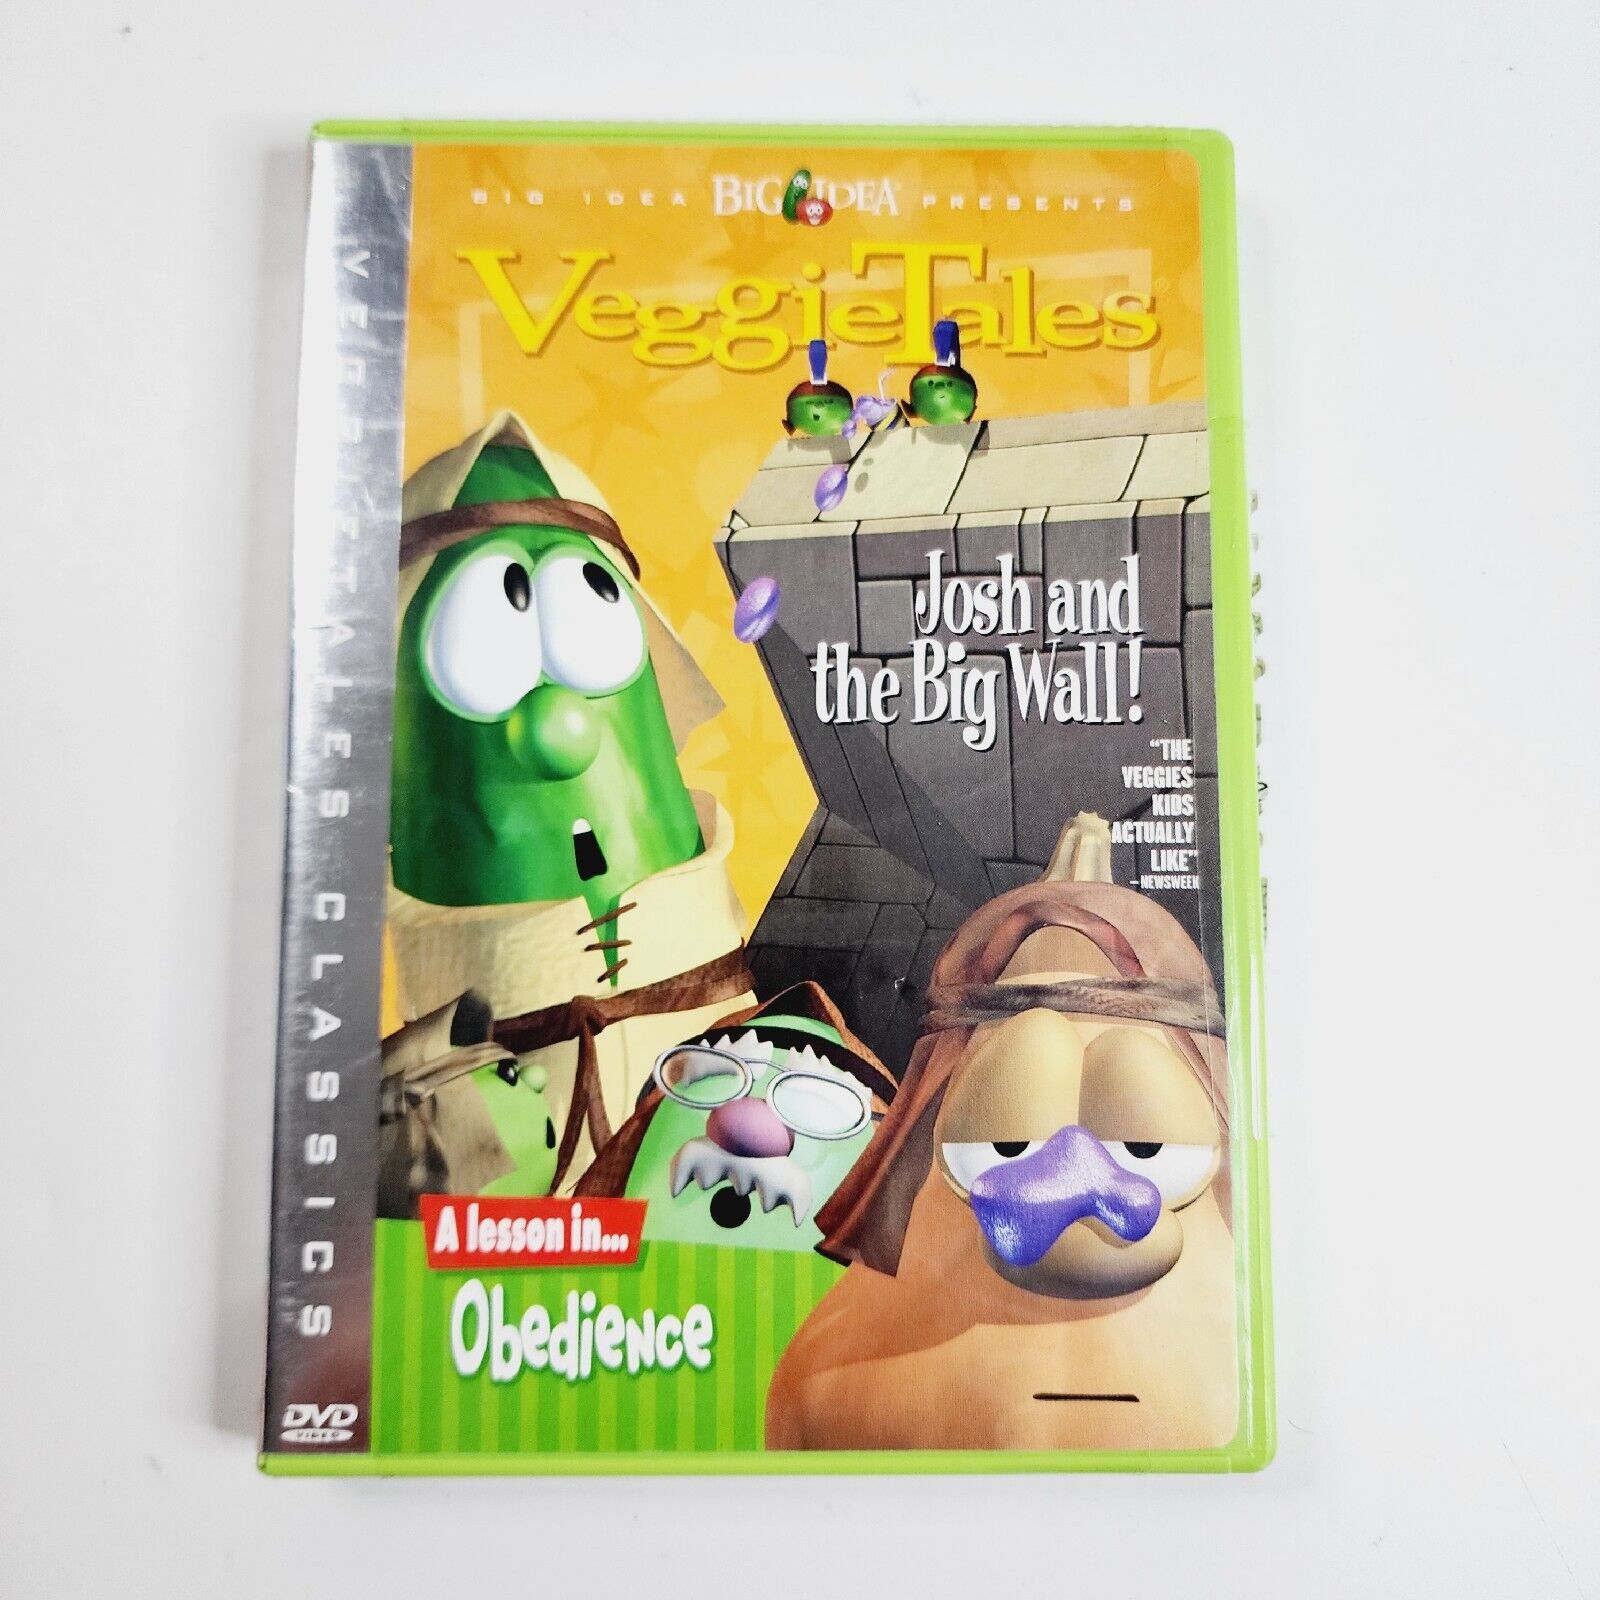 Veggietales Josh And The Big Wall DVD A lesson In... Obedience Classics